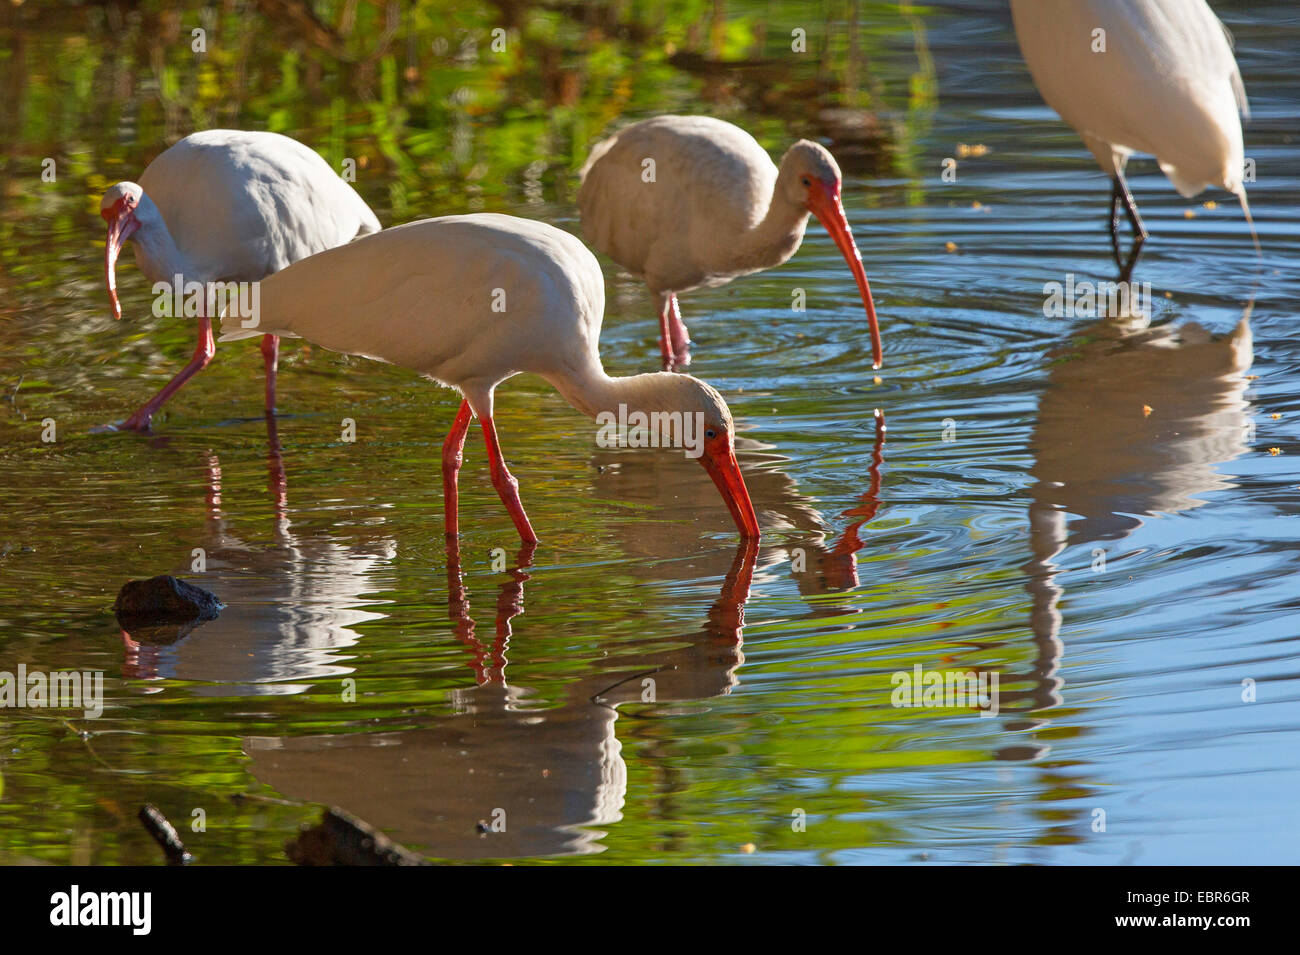 white ibis (Eudocimus albus), searching food in shallow water, in backlight, Costa Rica, Jaco Stock Photo